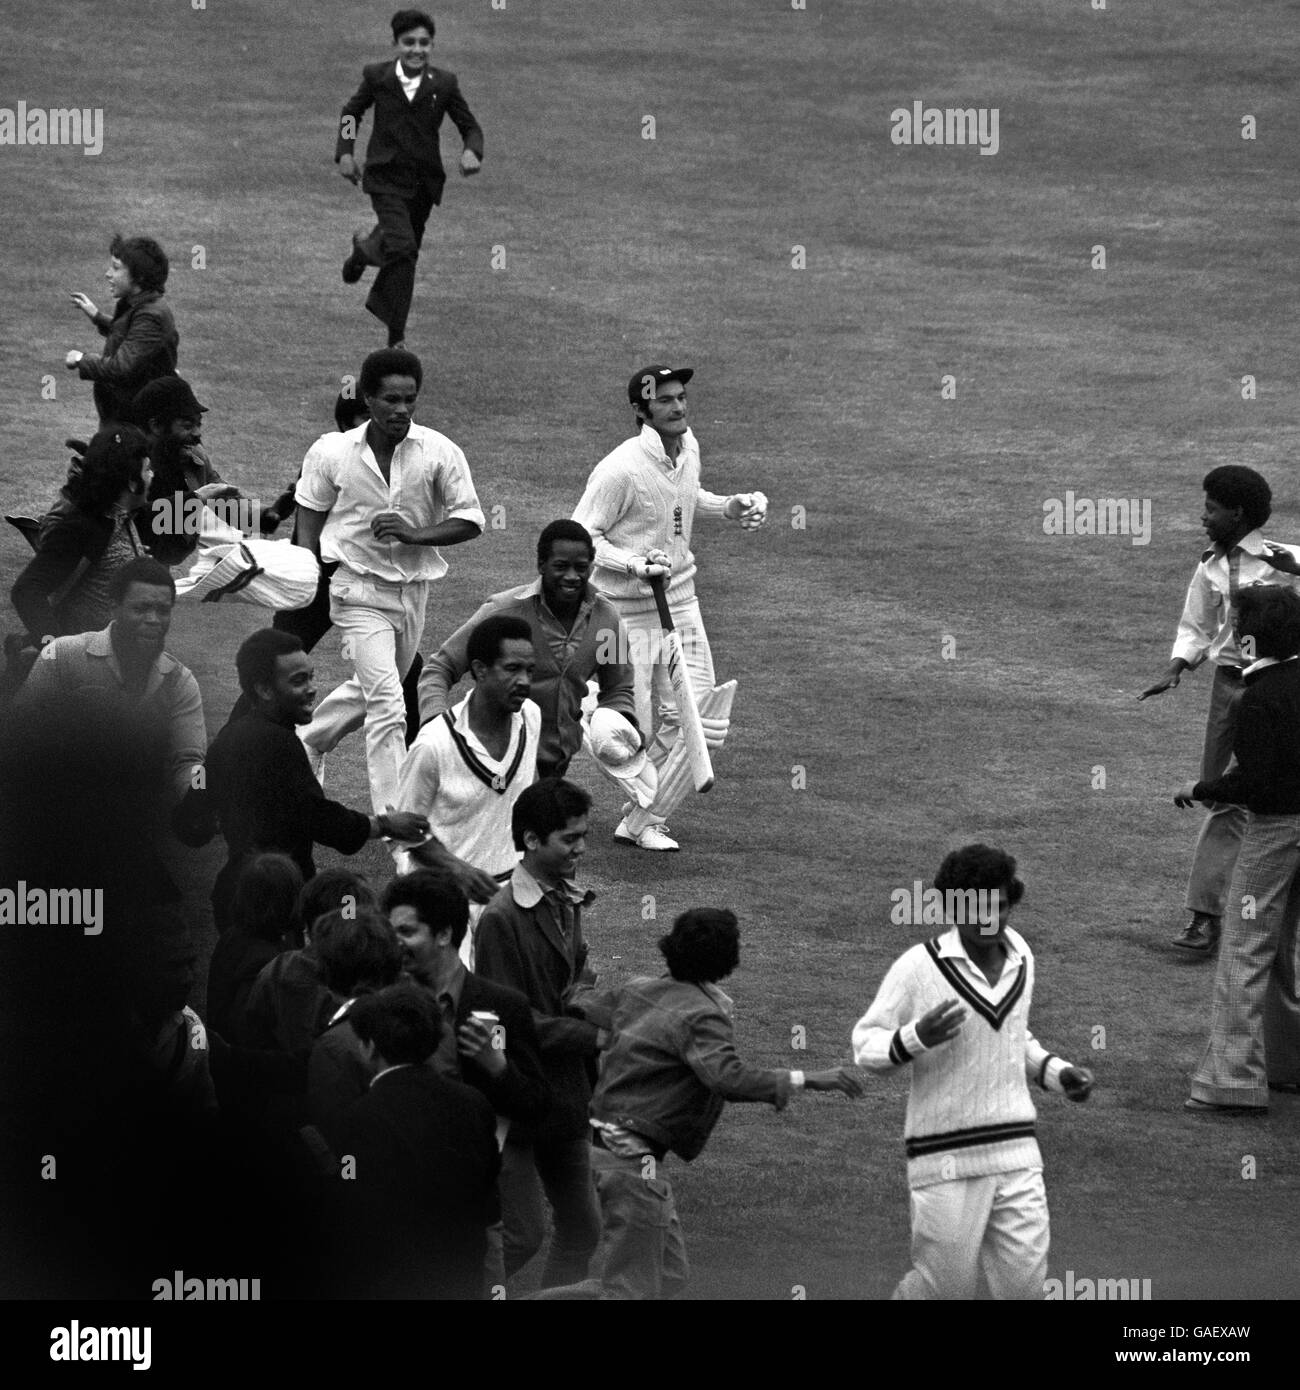 West Indian Keith Boyce, who took five first innings wickets for 70 runs, and Gary Sober(foreground) being congratulated by fans as they leave the field at the end of England's first innings on the third day of the first Test between England and the West Indies at the Oval. England were all out for 257, 158 runs behind the West Indies first innings total of 415. Stock Photo